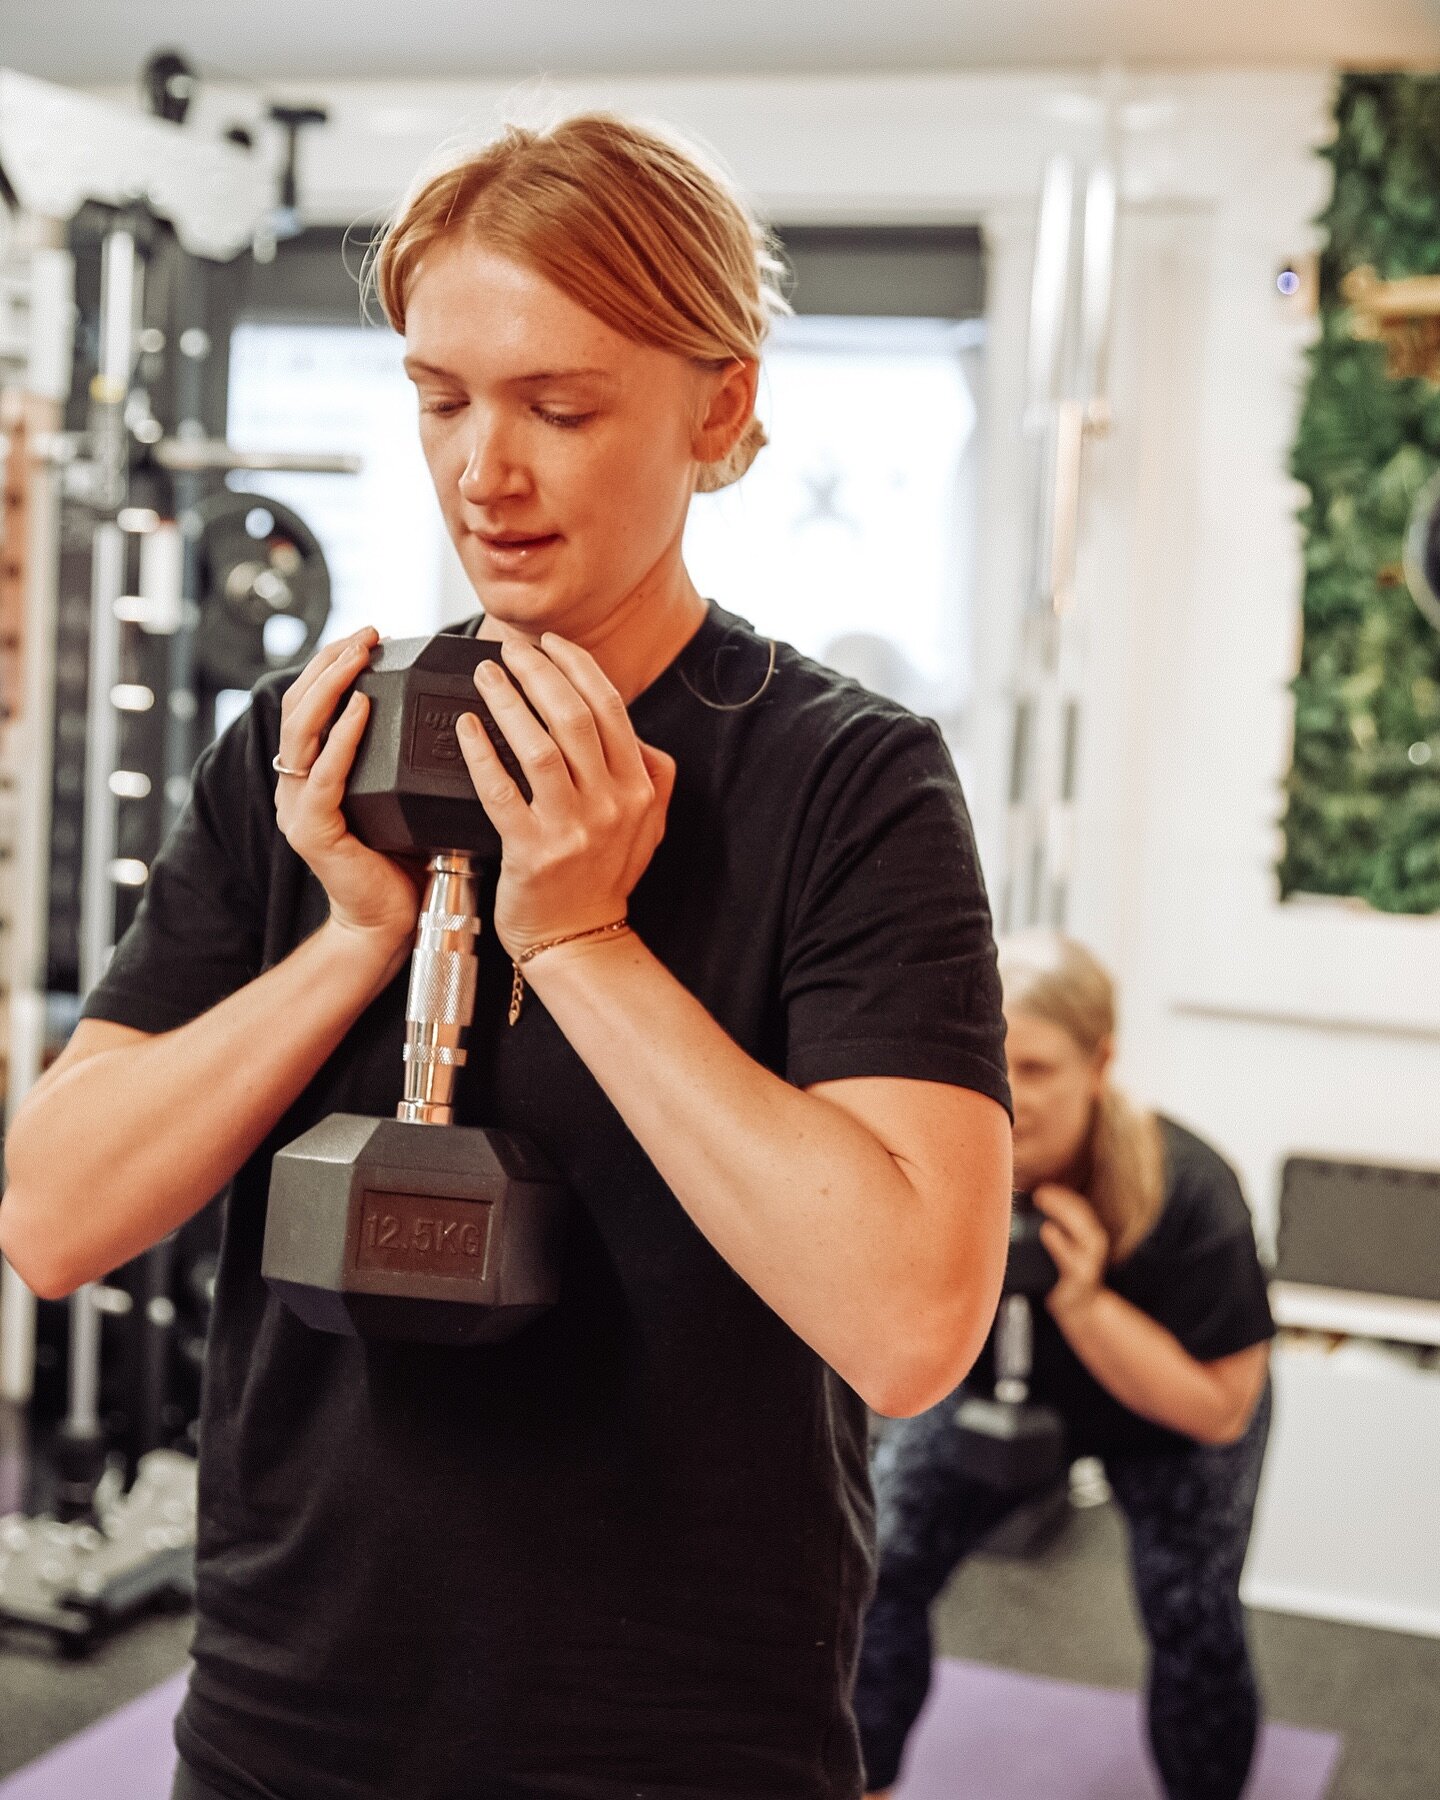 Warrior Women crew showing up for the good vibes &amp; gains today! 🔥 If you&rsquo;re looking for some Saturday self care, come on down, we&rsquo;ve got you covered 😎 #womenwholift #warriorwoman #womensonlygym #womensonlygymtottenam #tottenham #wom